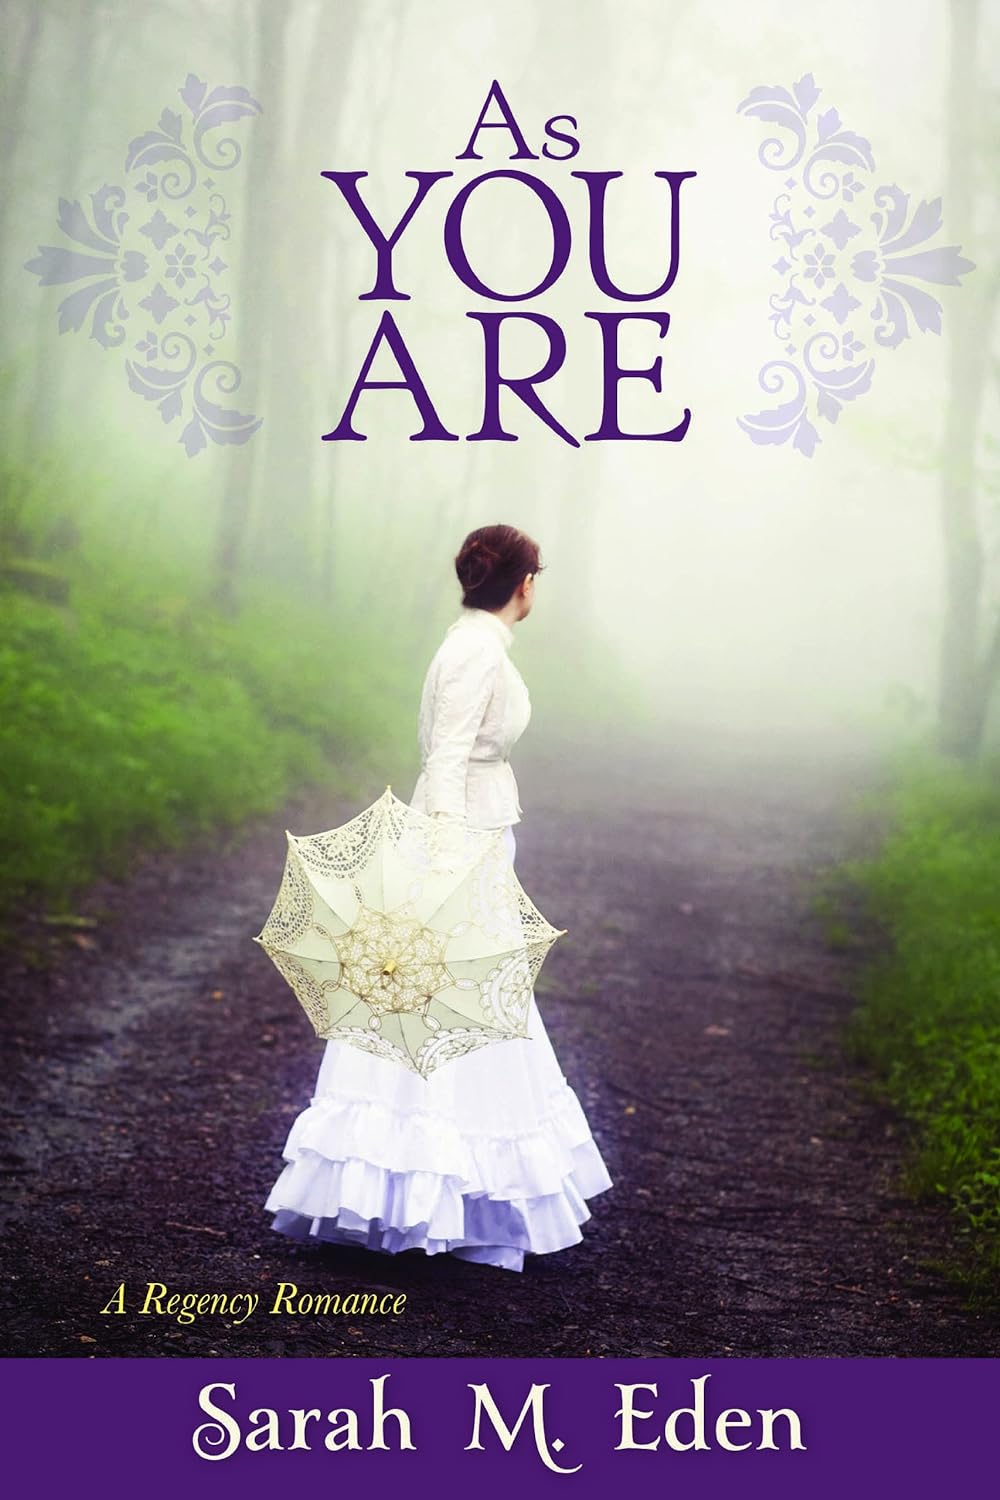 Book 3: As You Are